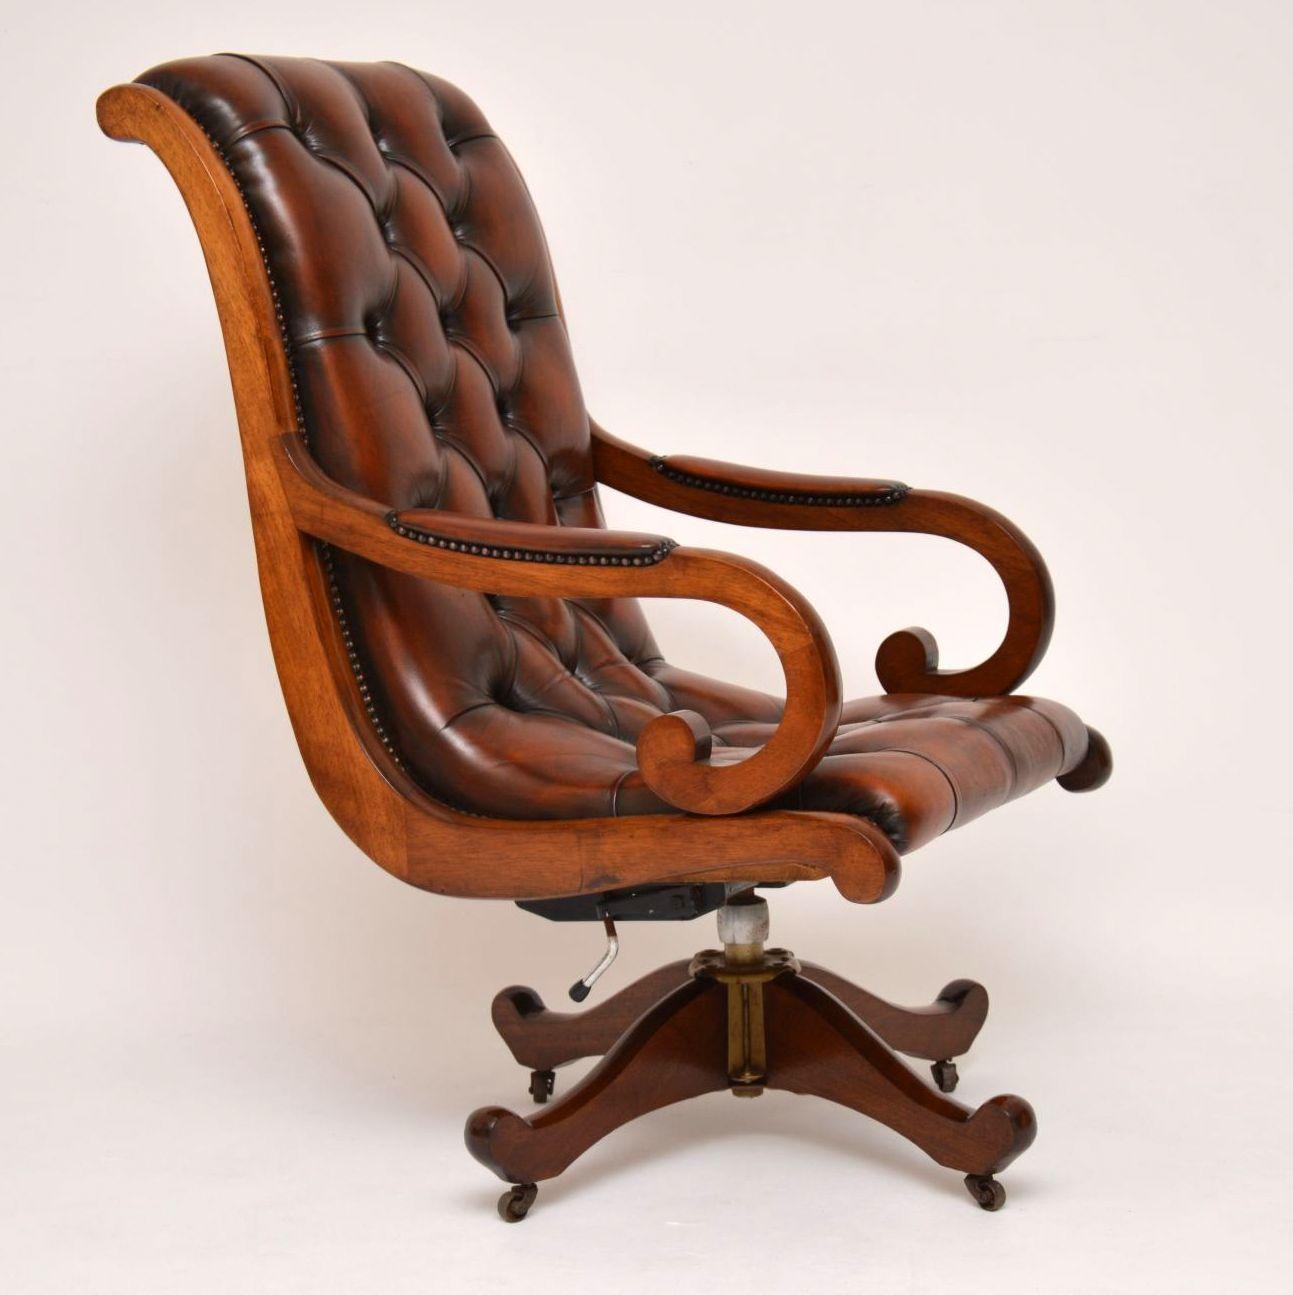 Antique Regency style mahogany swivel desk armchair upholstered in deep buttoned brown leather hand tacked onto the frame. Not only does it swivel, but it tilts back and can be adjusted in height. This is a very comfortable chair with good back